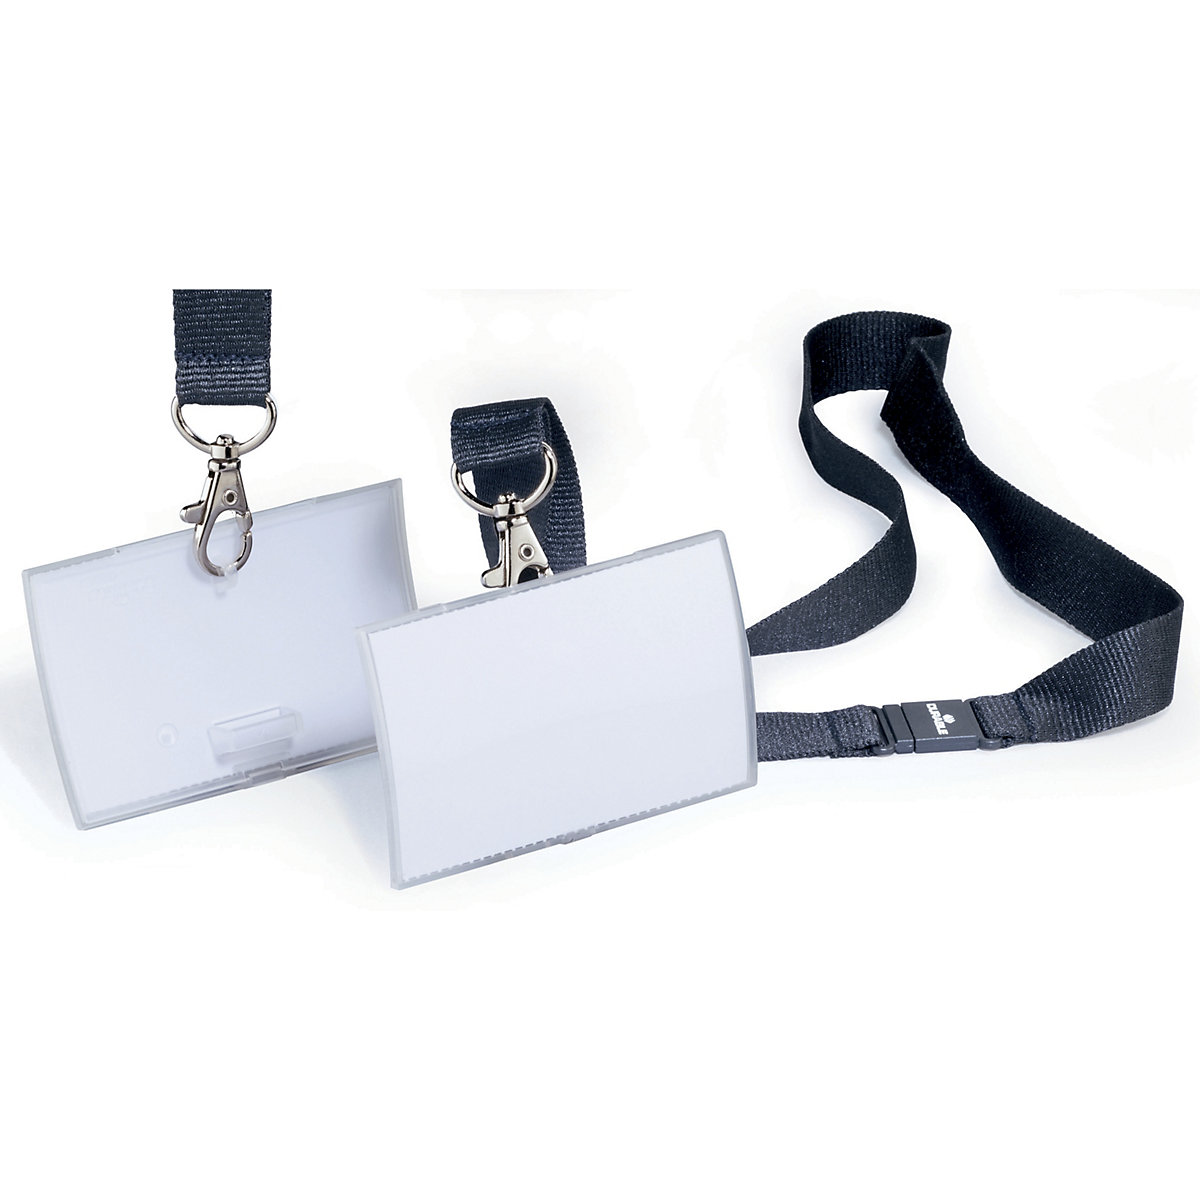 CLICK FOLD with fabric strap - DURABLE